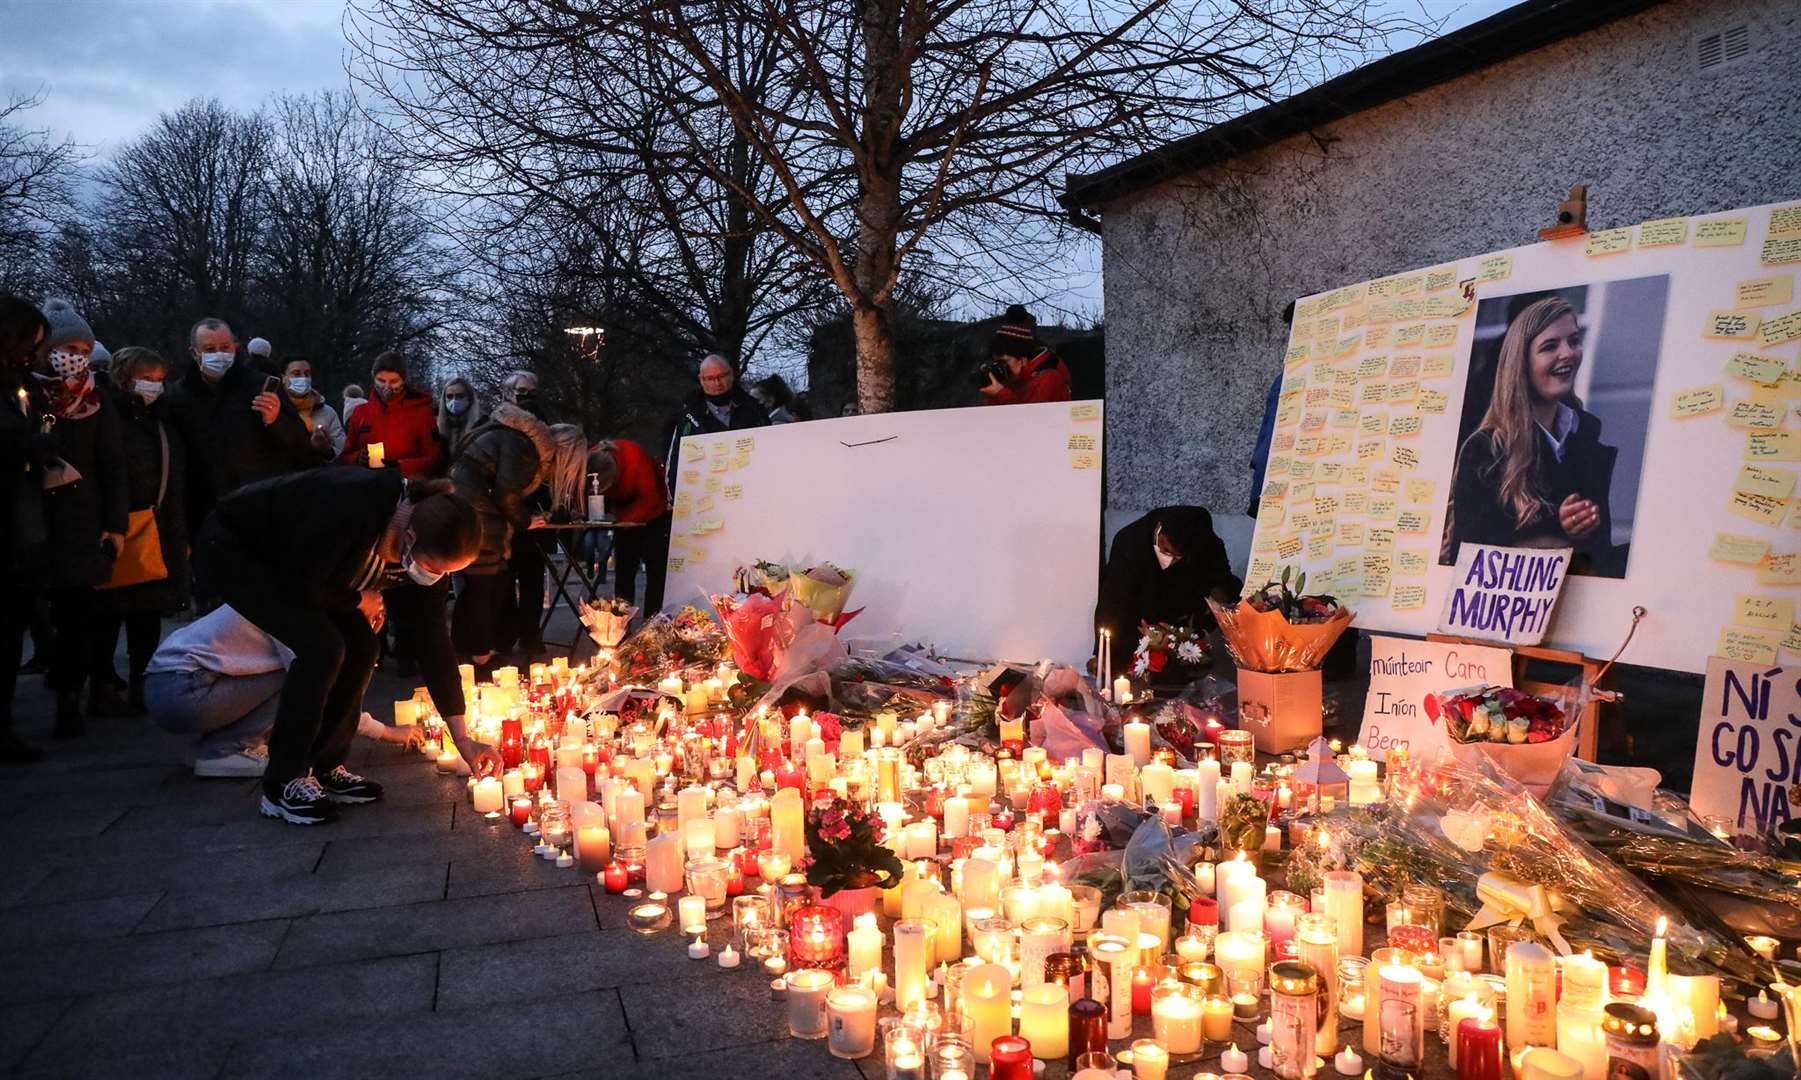 Local people light candles after after a vigil in memory of Aisling Murphy in Tullamore town Park, County Offaly (Damien Eagers/PA)